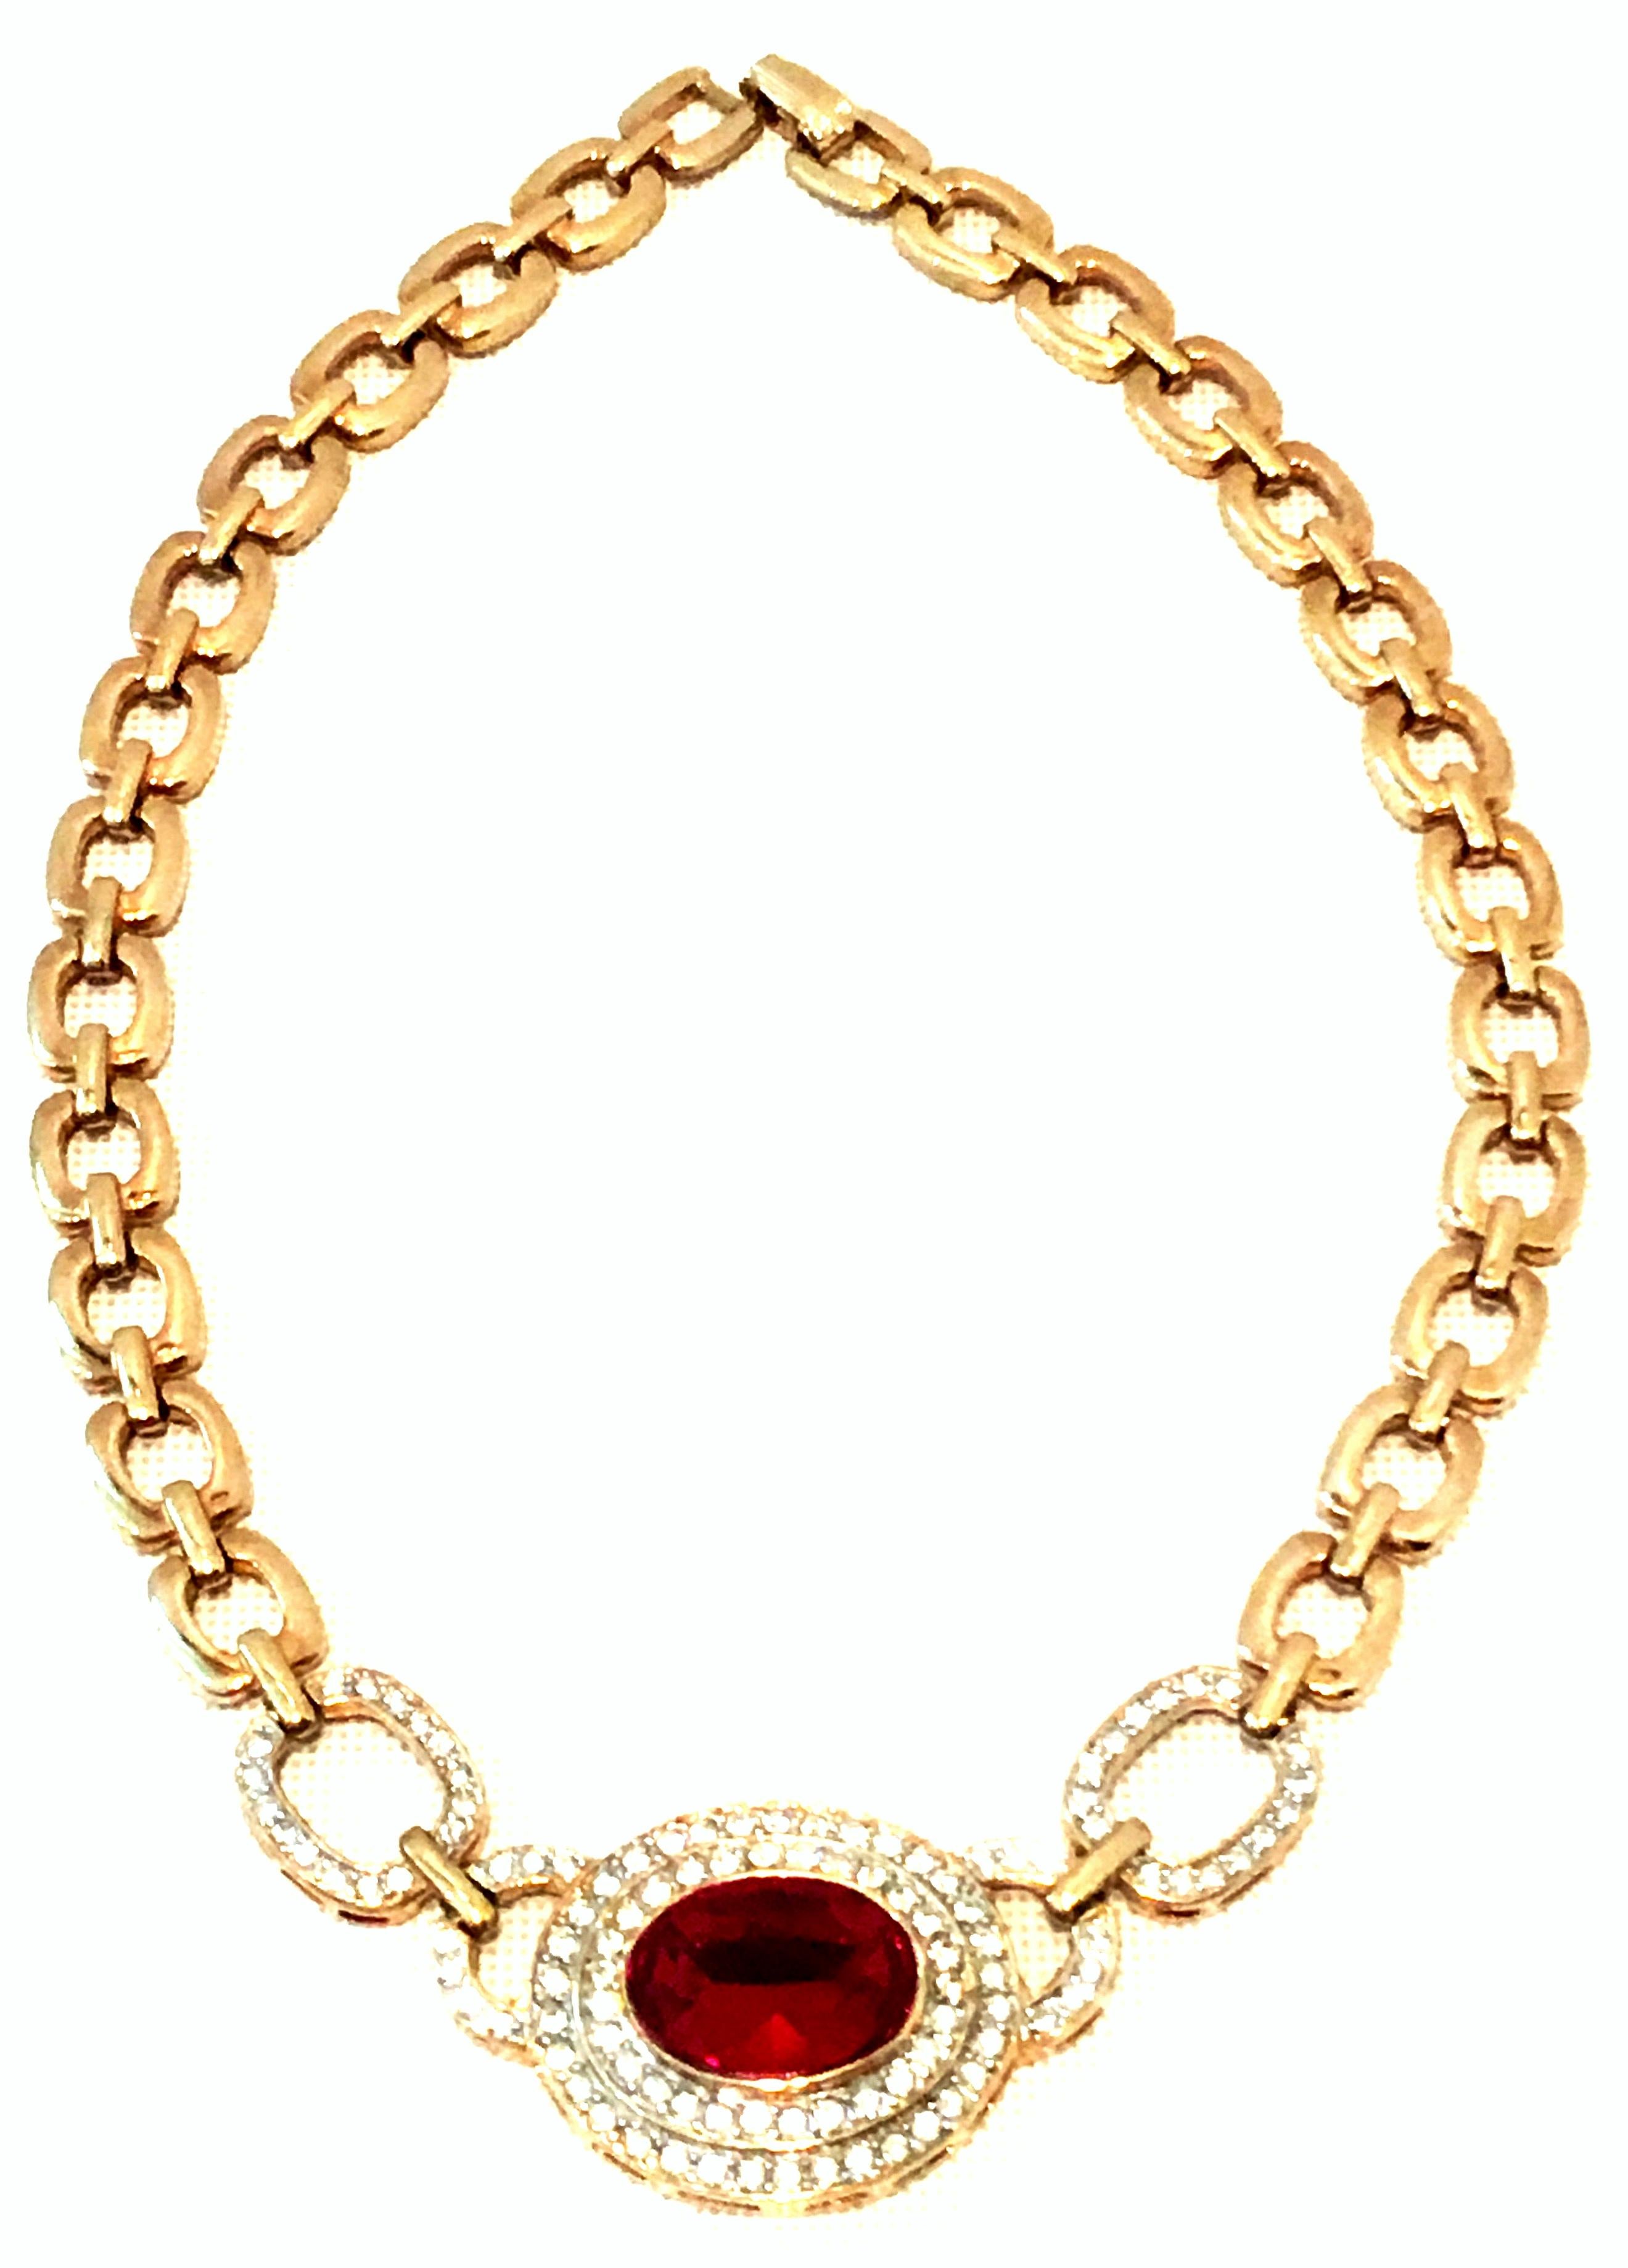 20th Century Christian Dior Style Gold Plate & Austrian Crystal Style Necklace. This gold plate choker style chain link necklace attributed to Christian Dior features a central ornament of paste set colorless brilliant cut and faceted stones with a